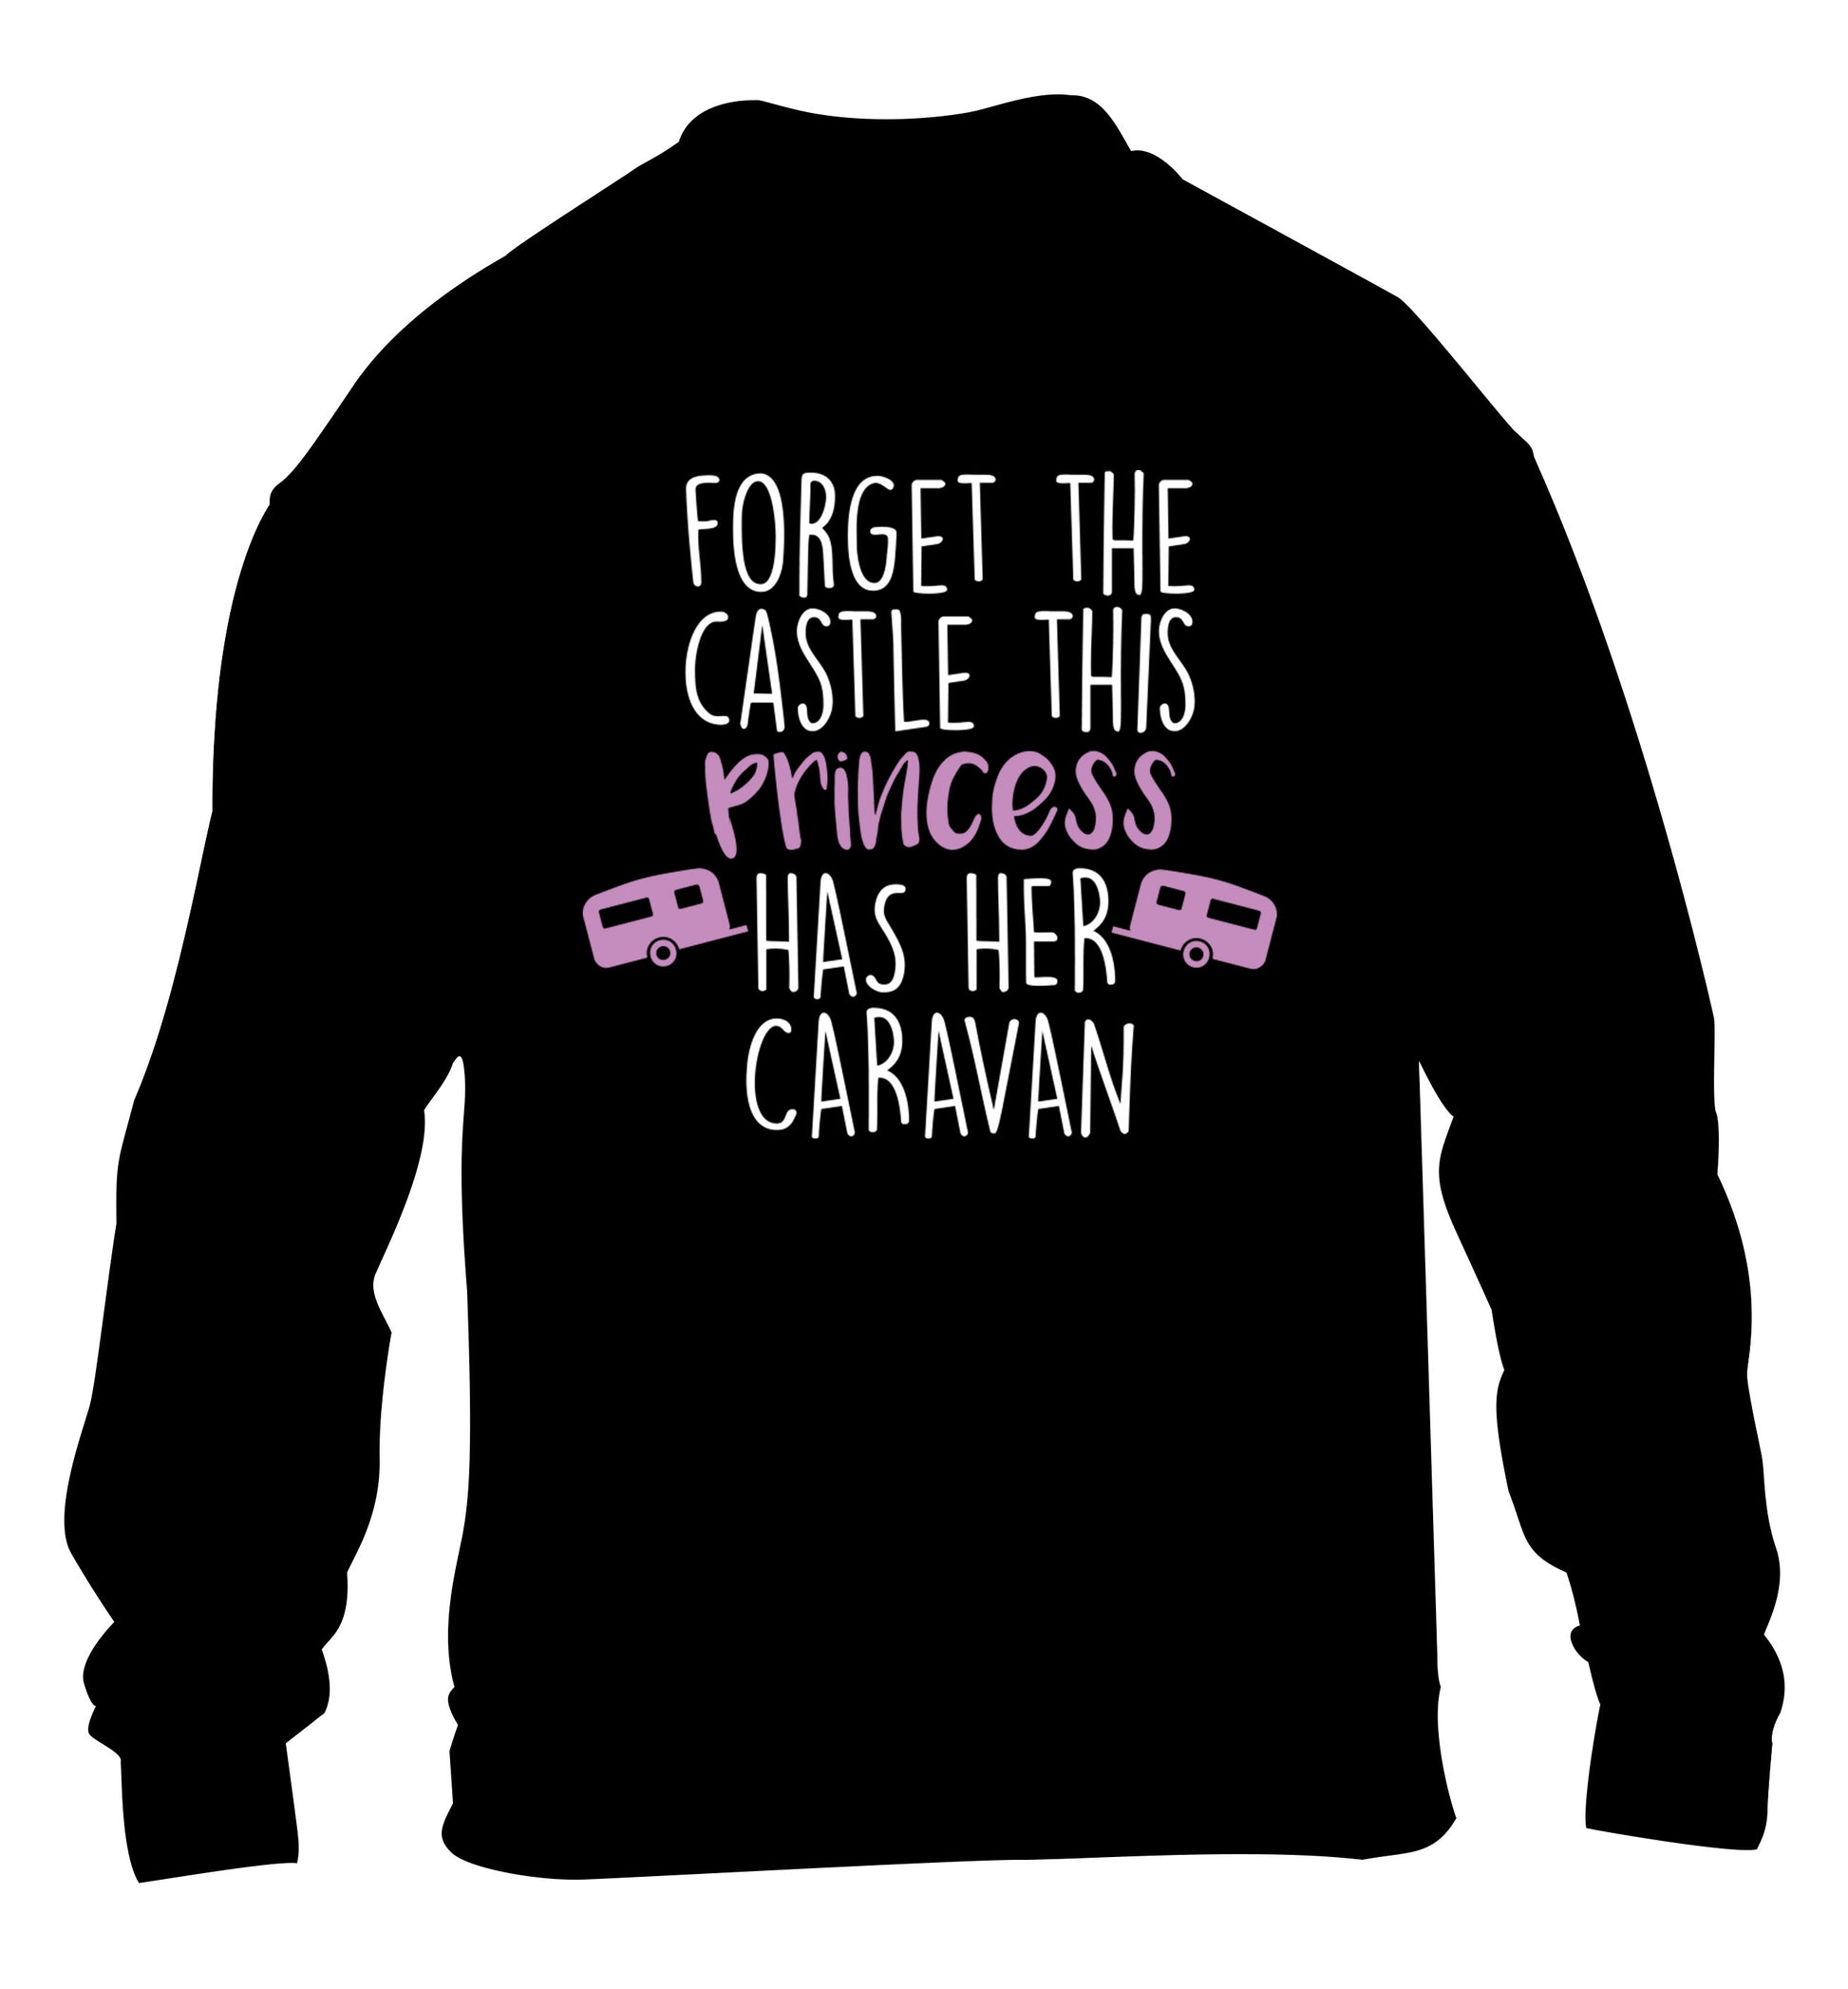 Forget the castle this princess lives at the caravan children's black sweater 12-14 Years